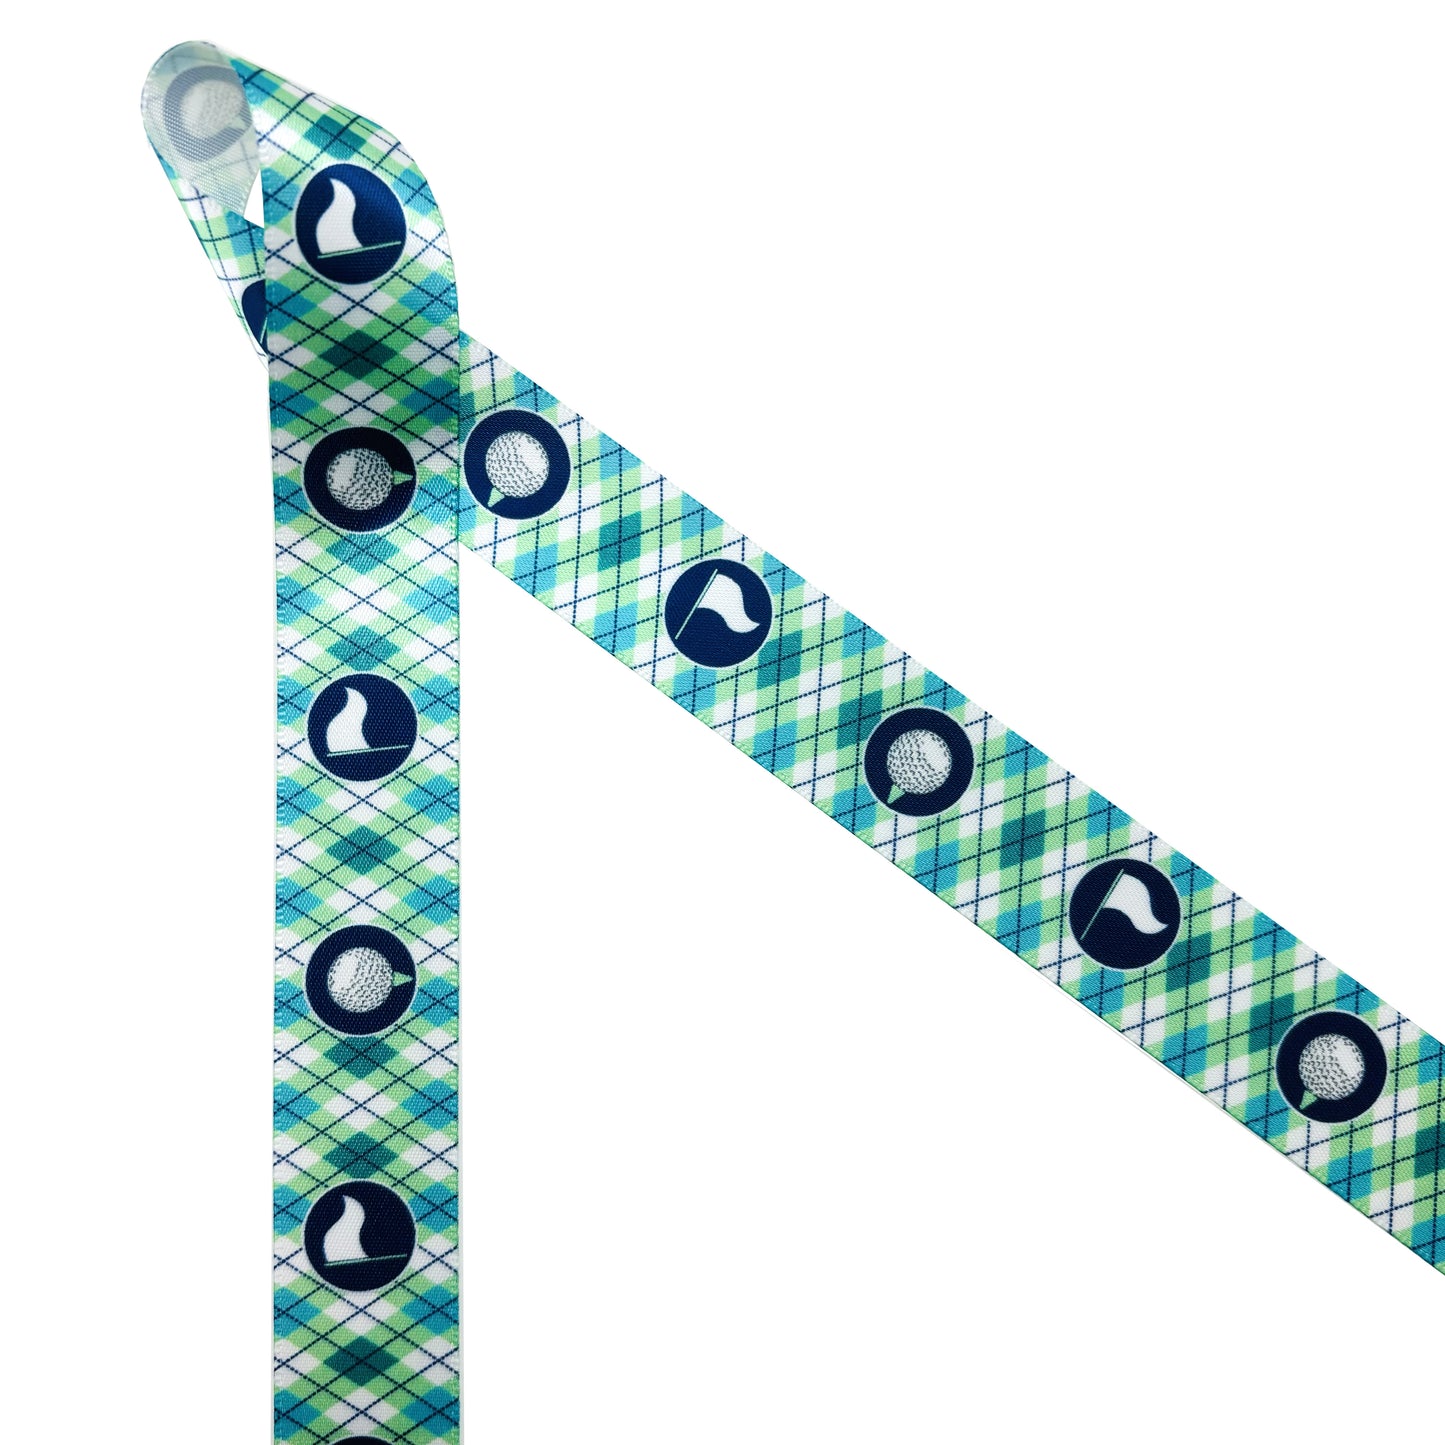 Golf ribbon golf balls and tees and golf flags in an argyle background in pink or blue printed on 7/8" white satin